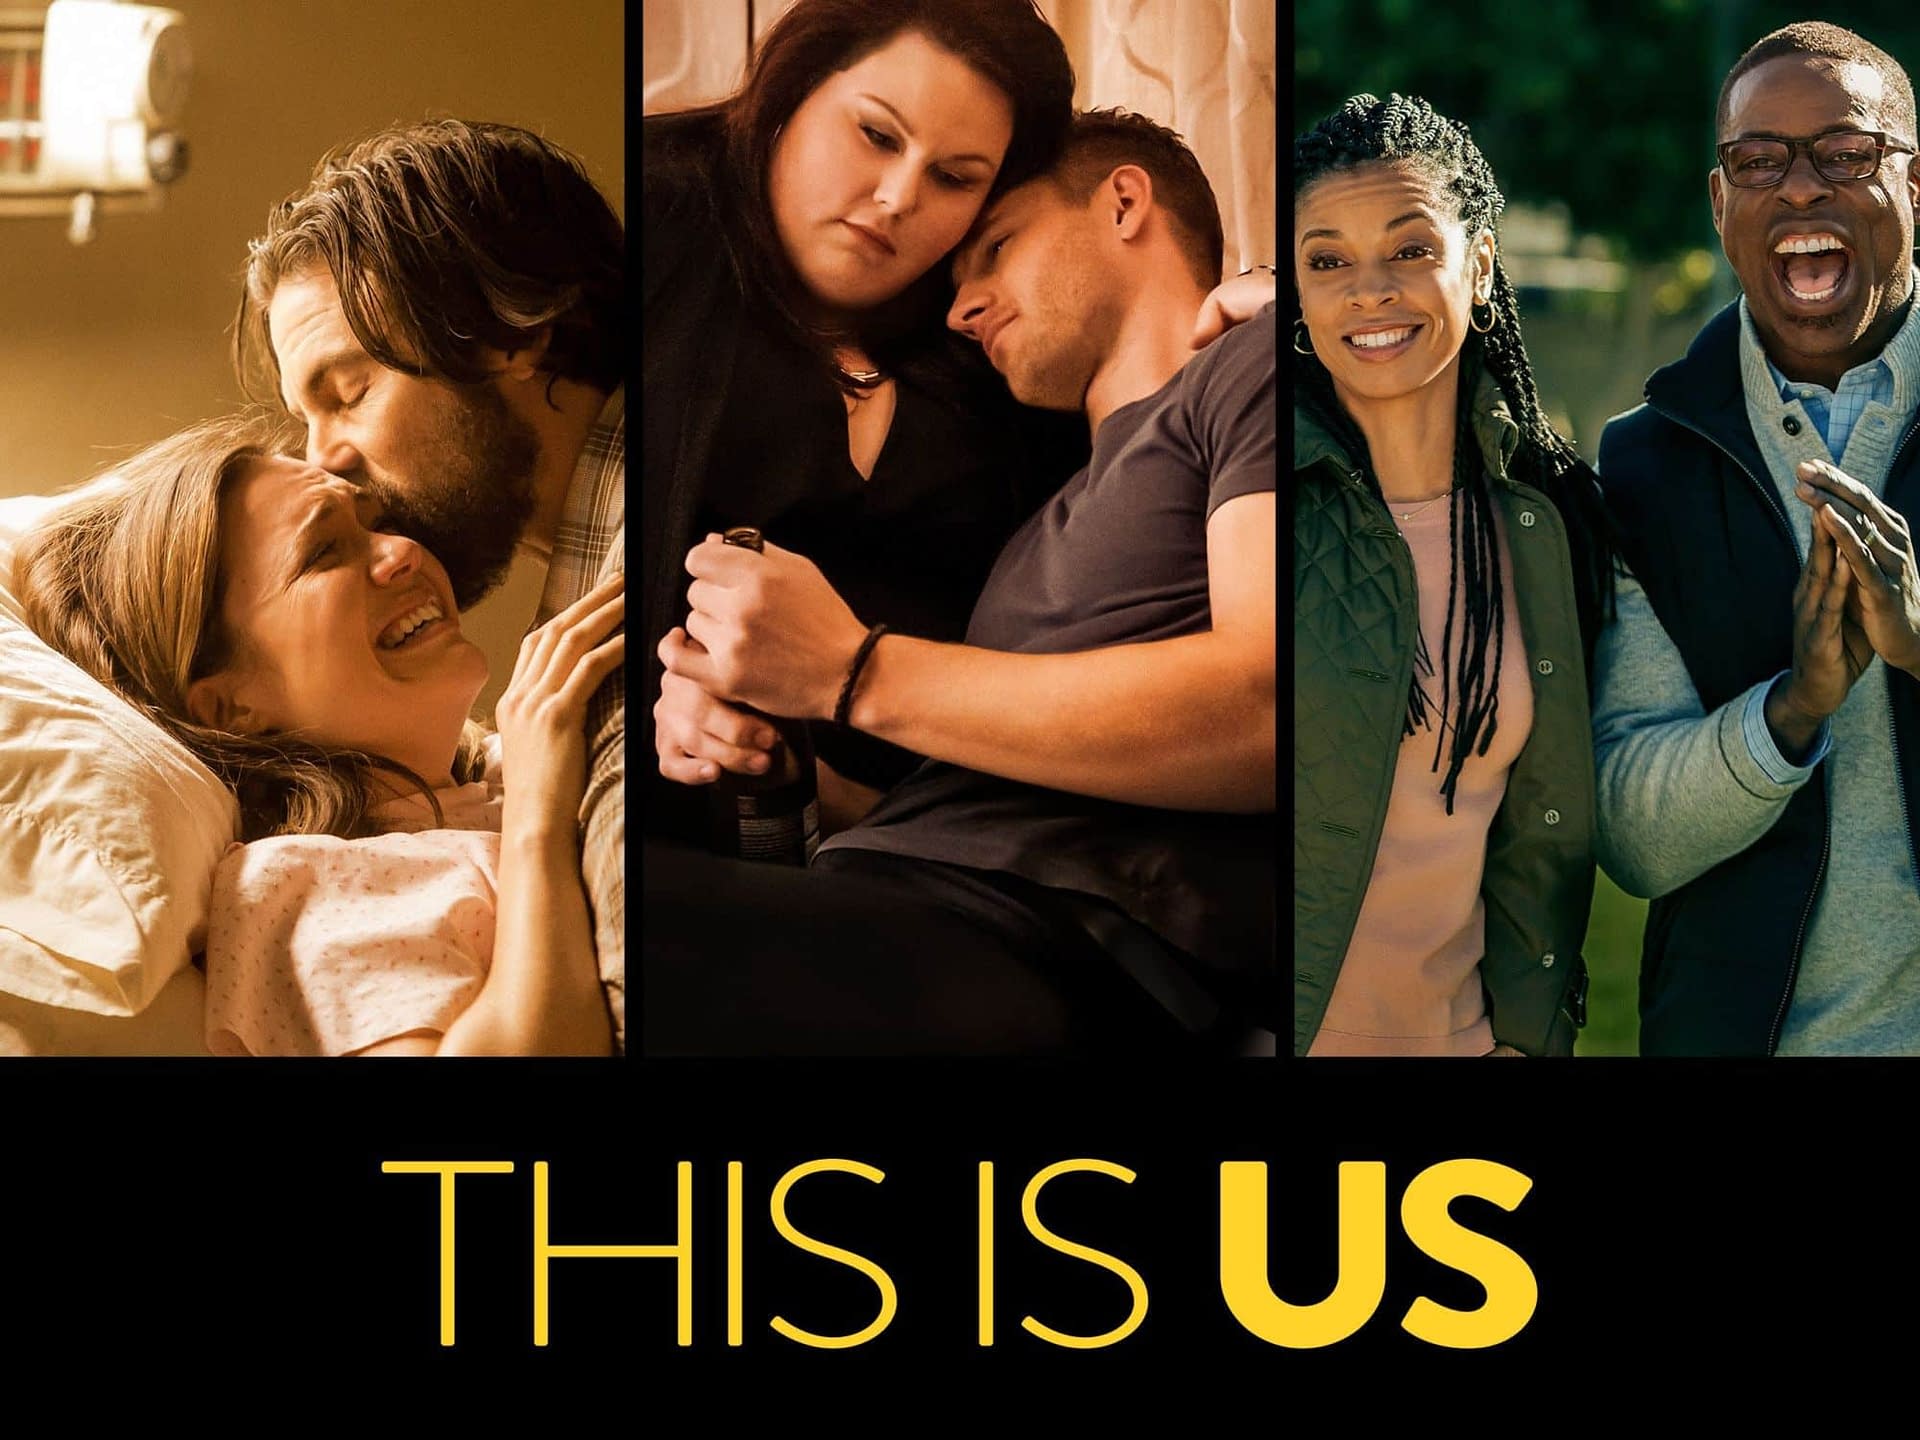 This Is Us Season 1: This is Real. This is Love. This is Life. This is Our Recap. (BC REWIND)